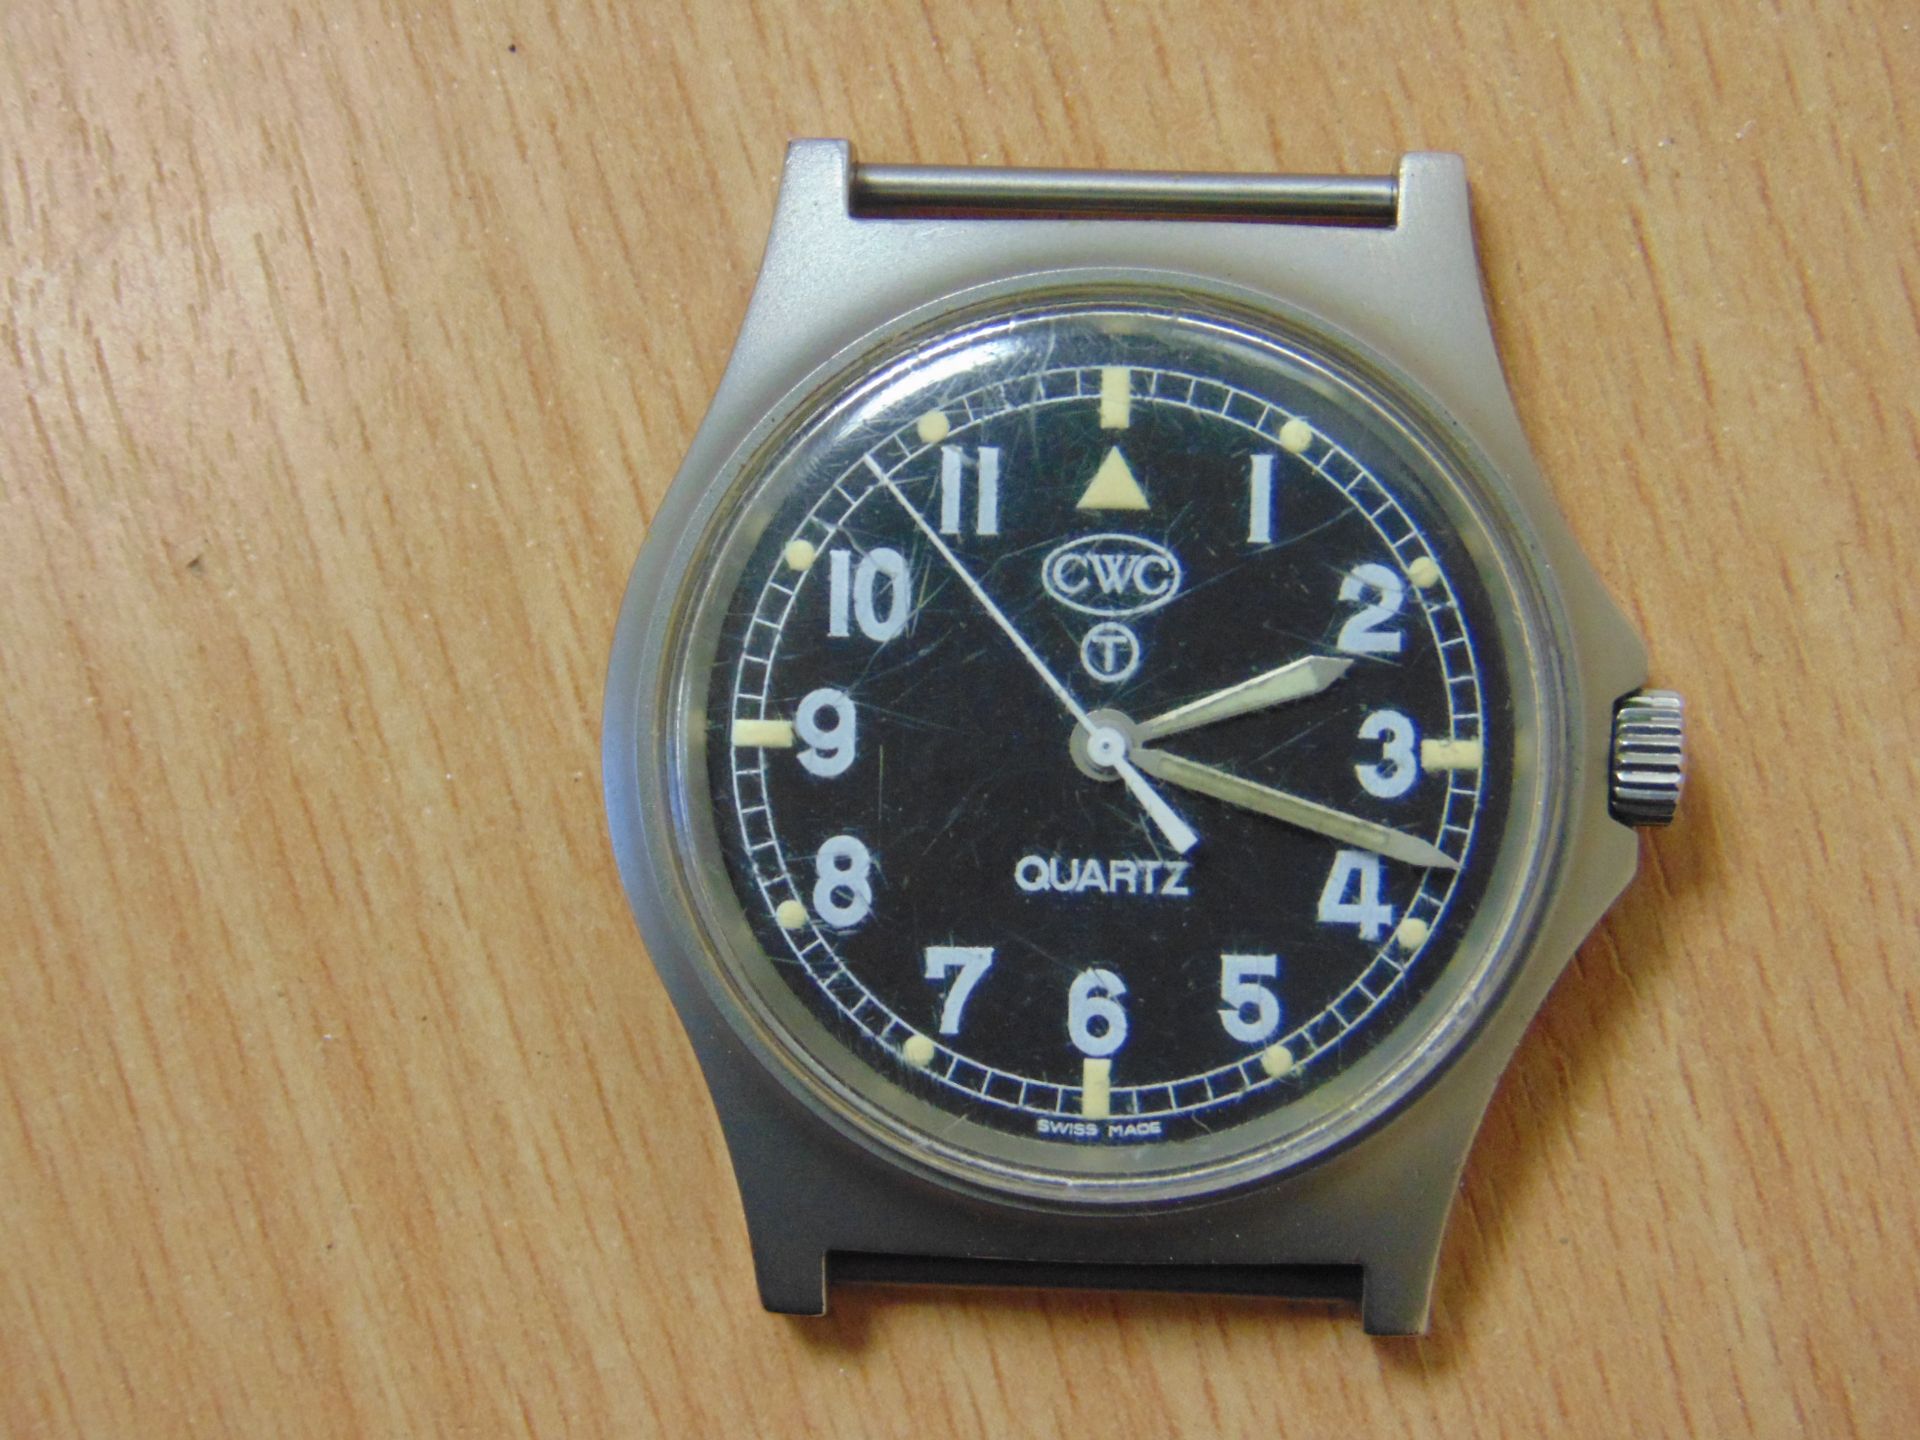 CWC W10 SERVICE WATCH NATO NUMBERS DATE 1997 - Image 5 of 7